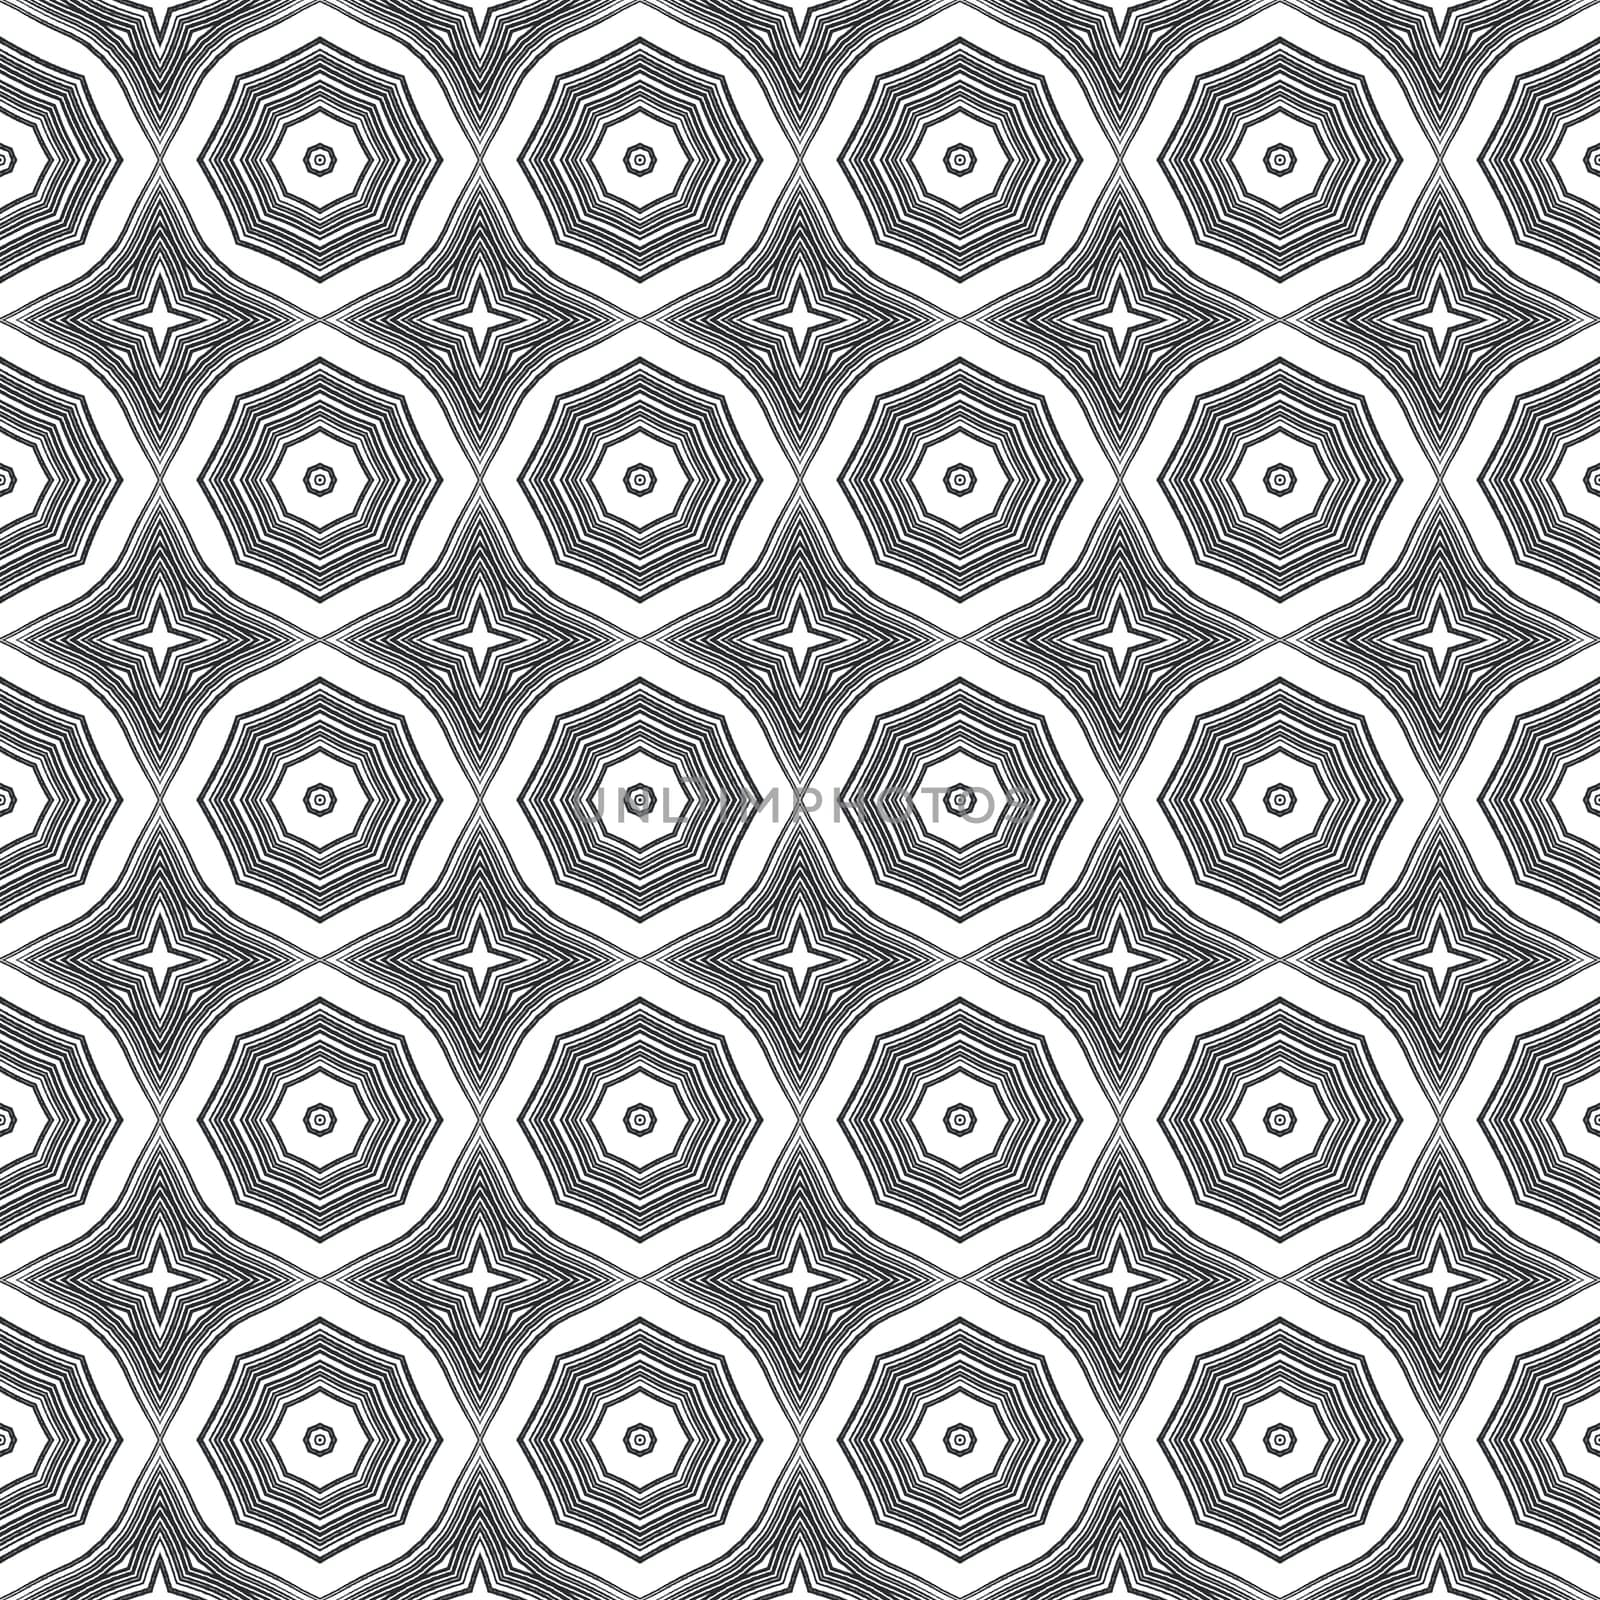 Striped hand drawn pattern. Black symmetrical kaleidoscope background. Textile ready likable print, swimwear fabric, wallpaper, wrapping. Repeating striped hand drawn tile.